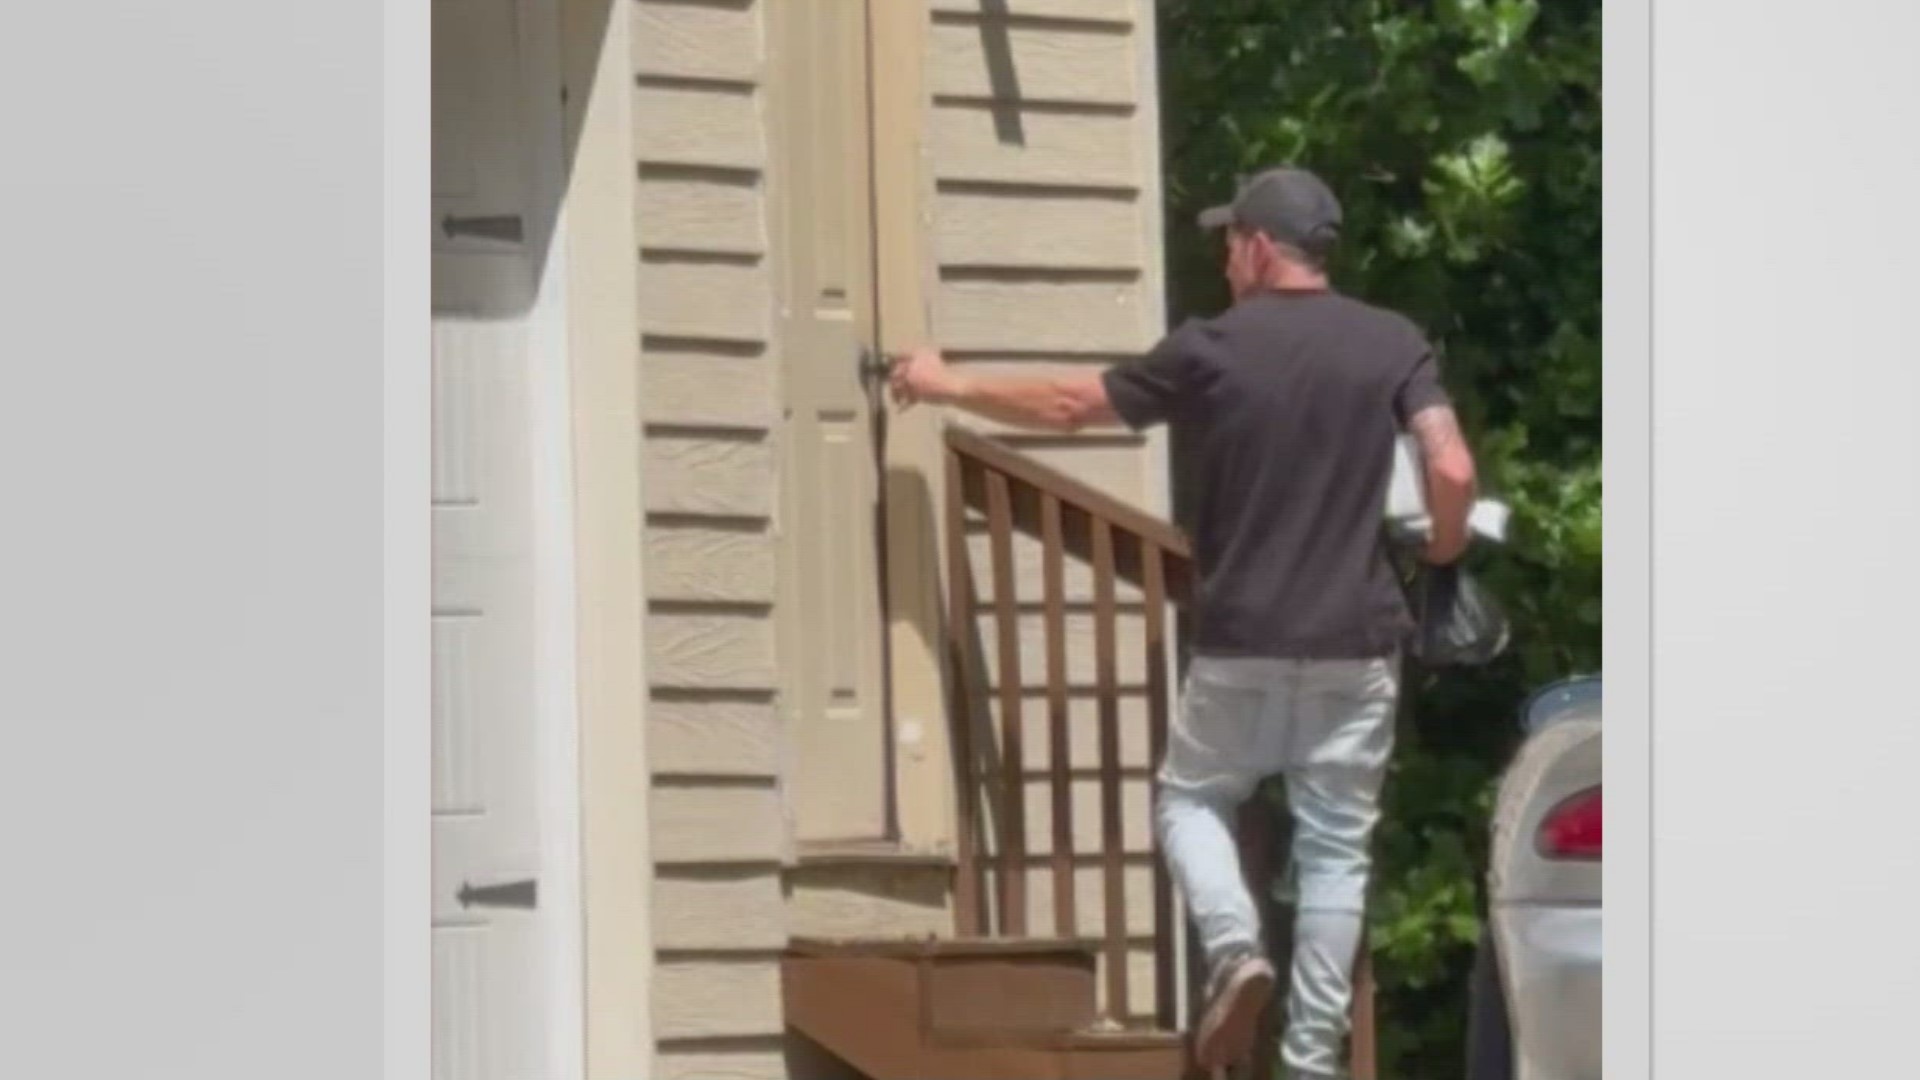 Cobb County Neighbors Refuse to Squat in Vacant Home